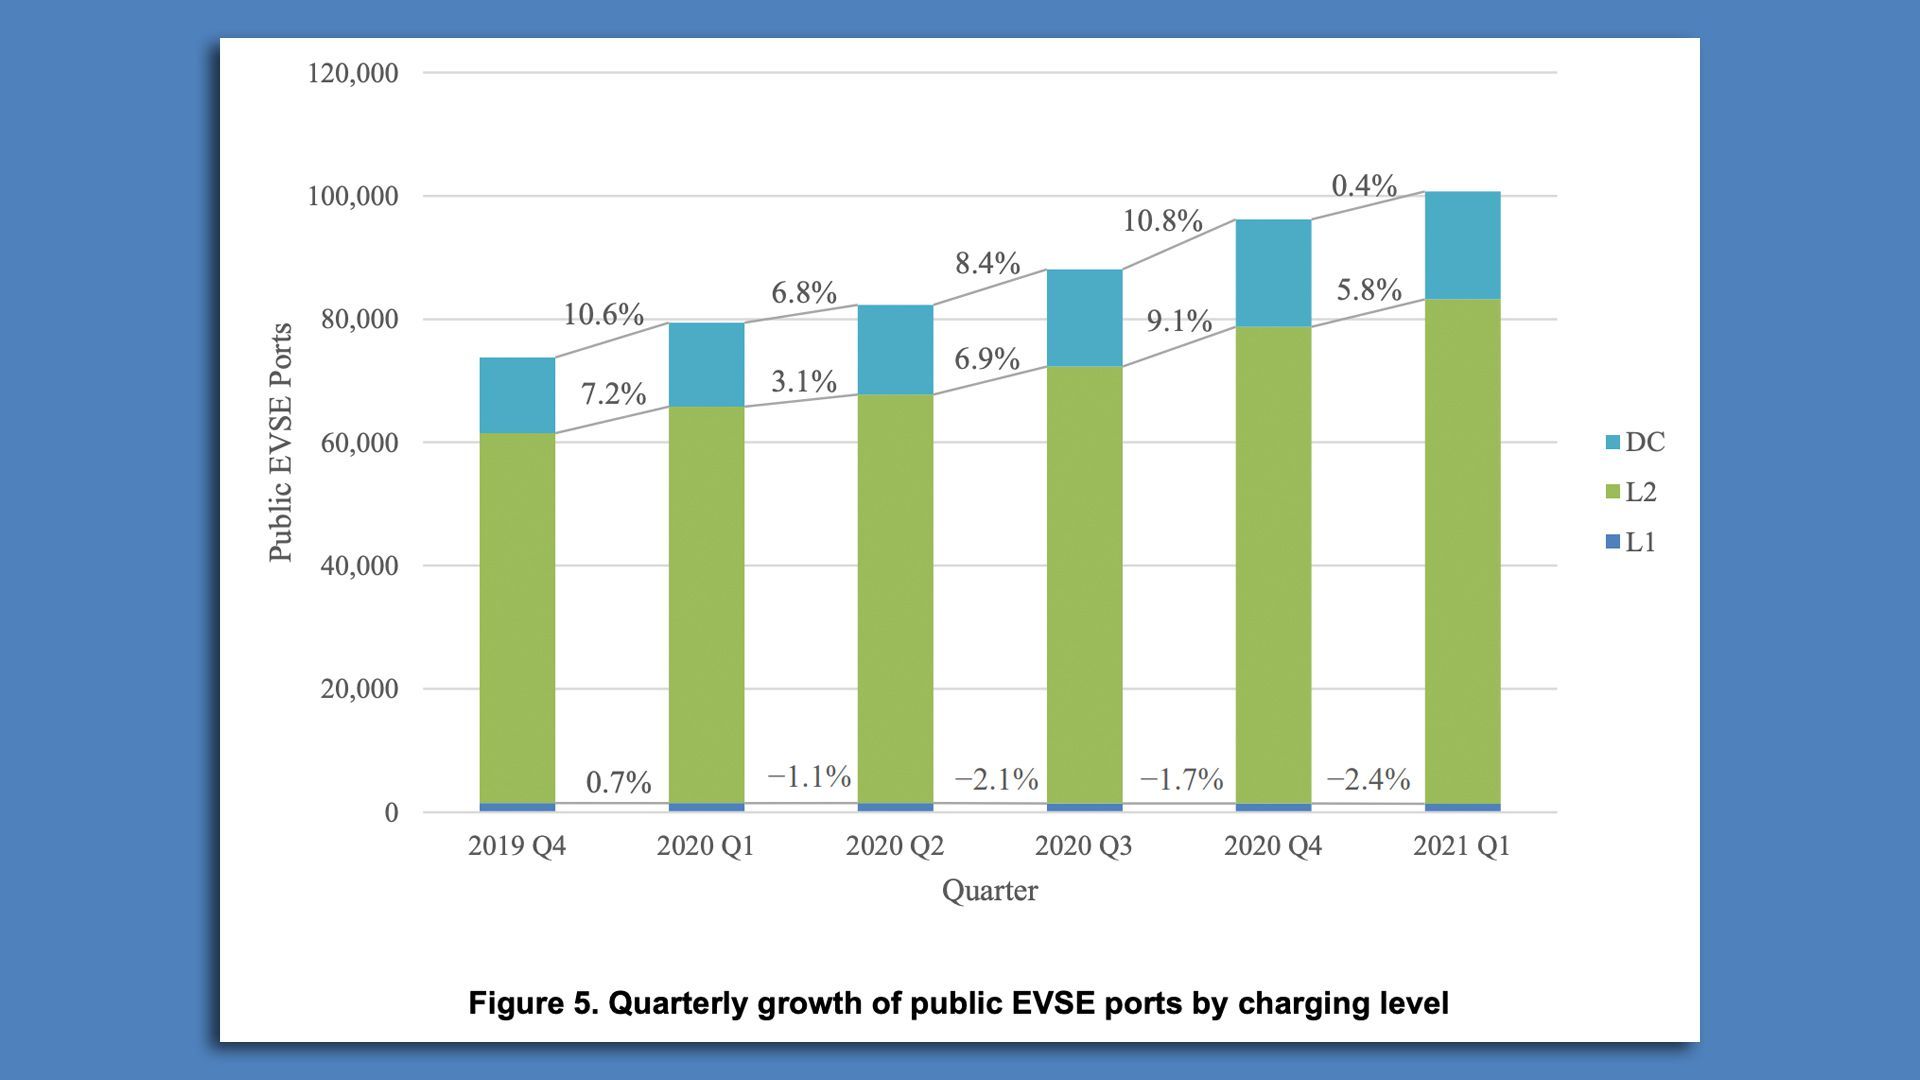 Graph showing quarterly growth of public ESVE ports by charging level.